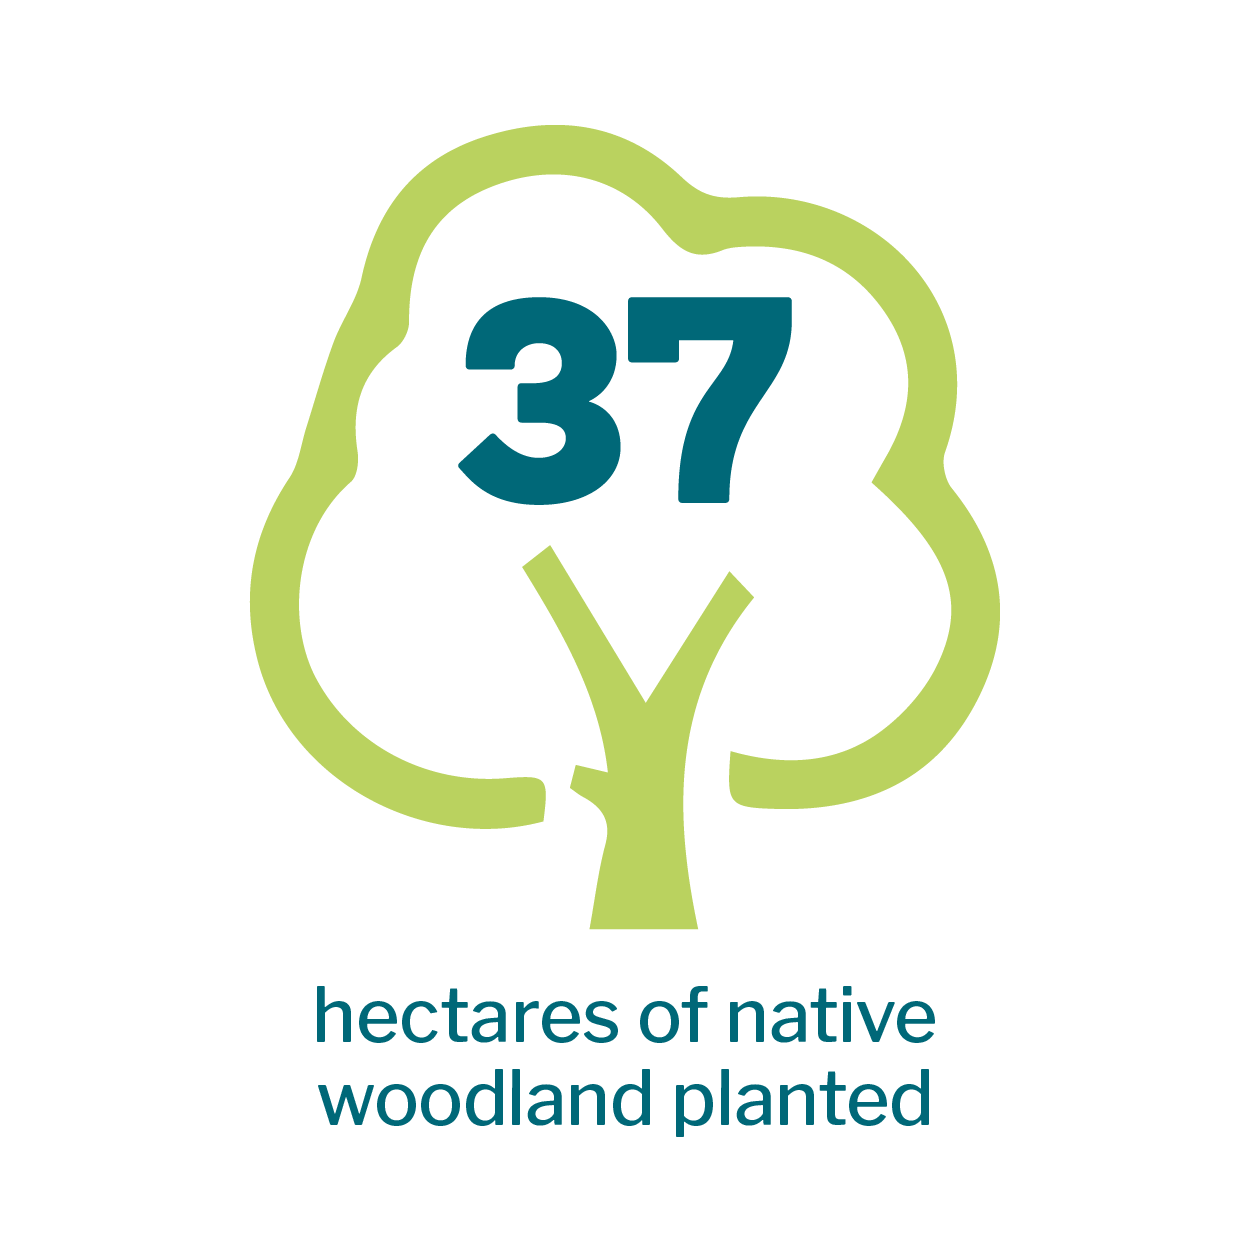 Tree icon that reads: 5 hectares of native woodland planted